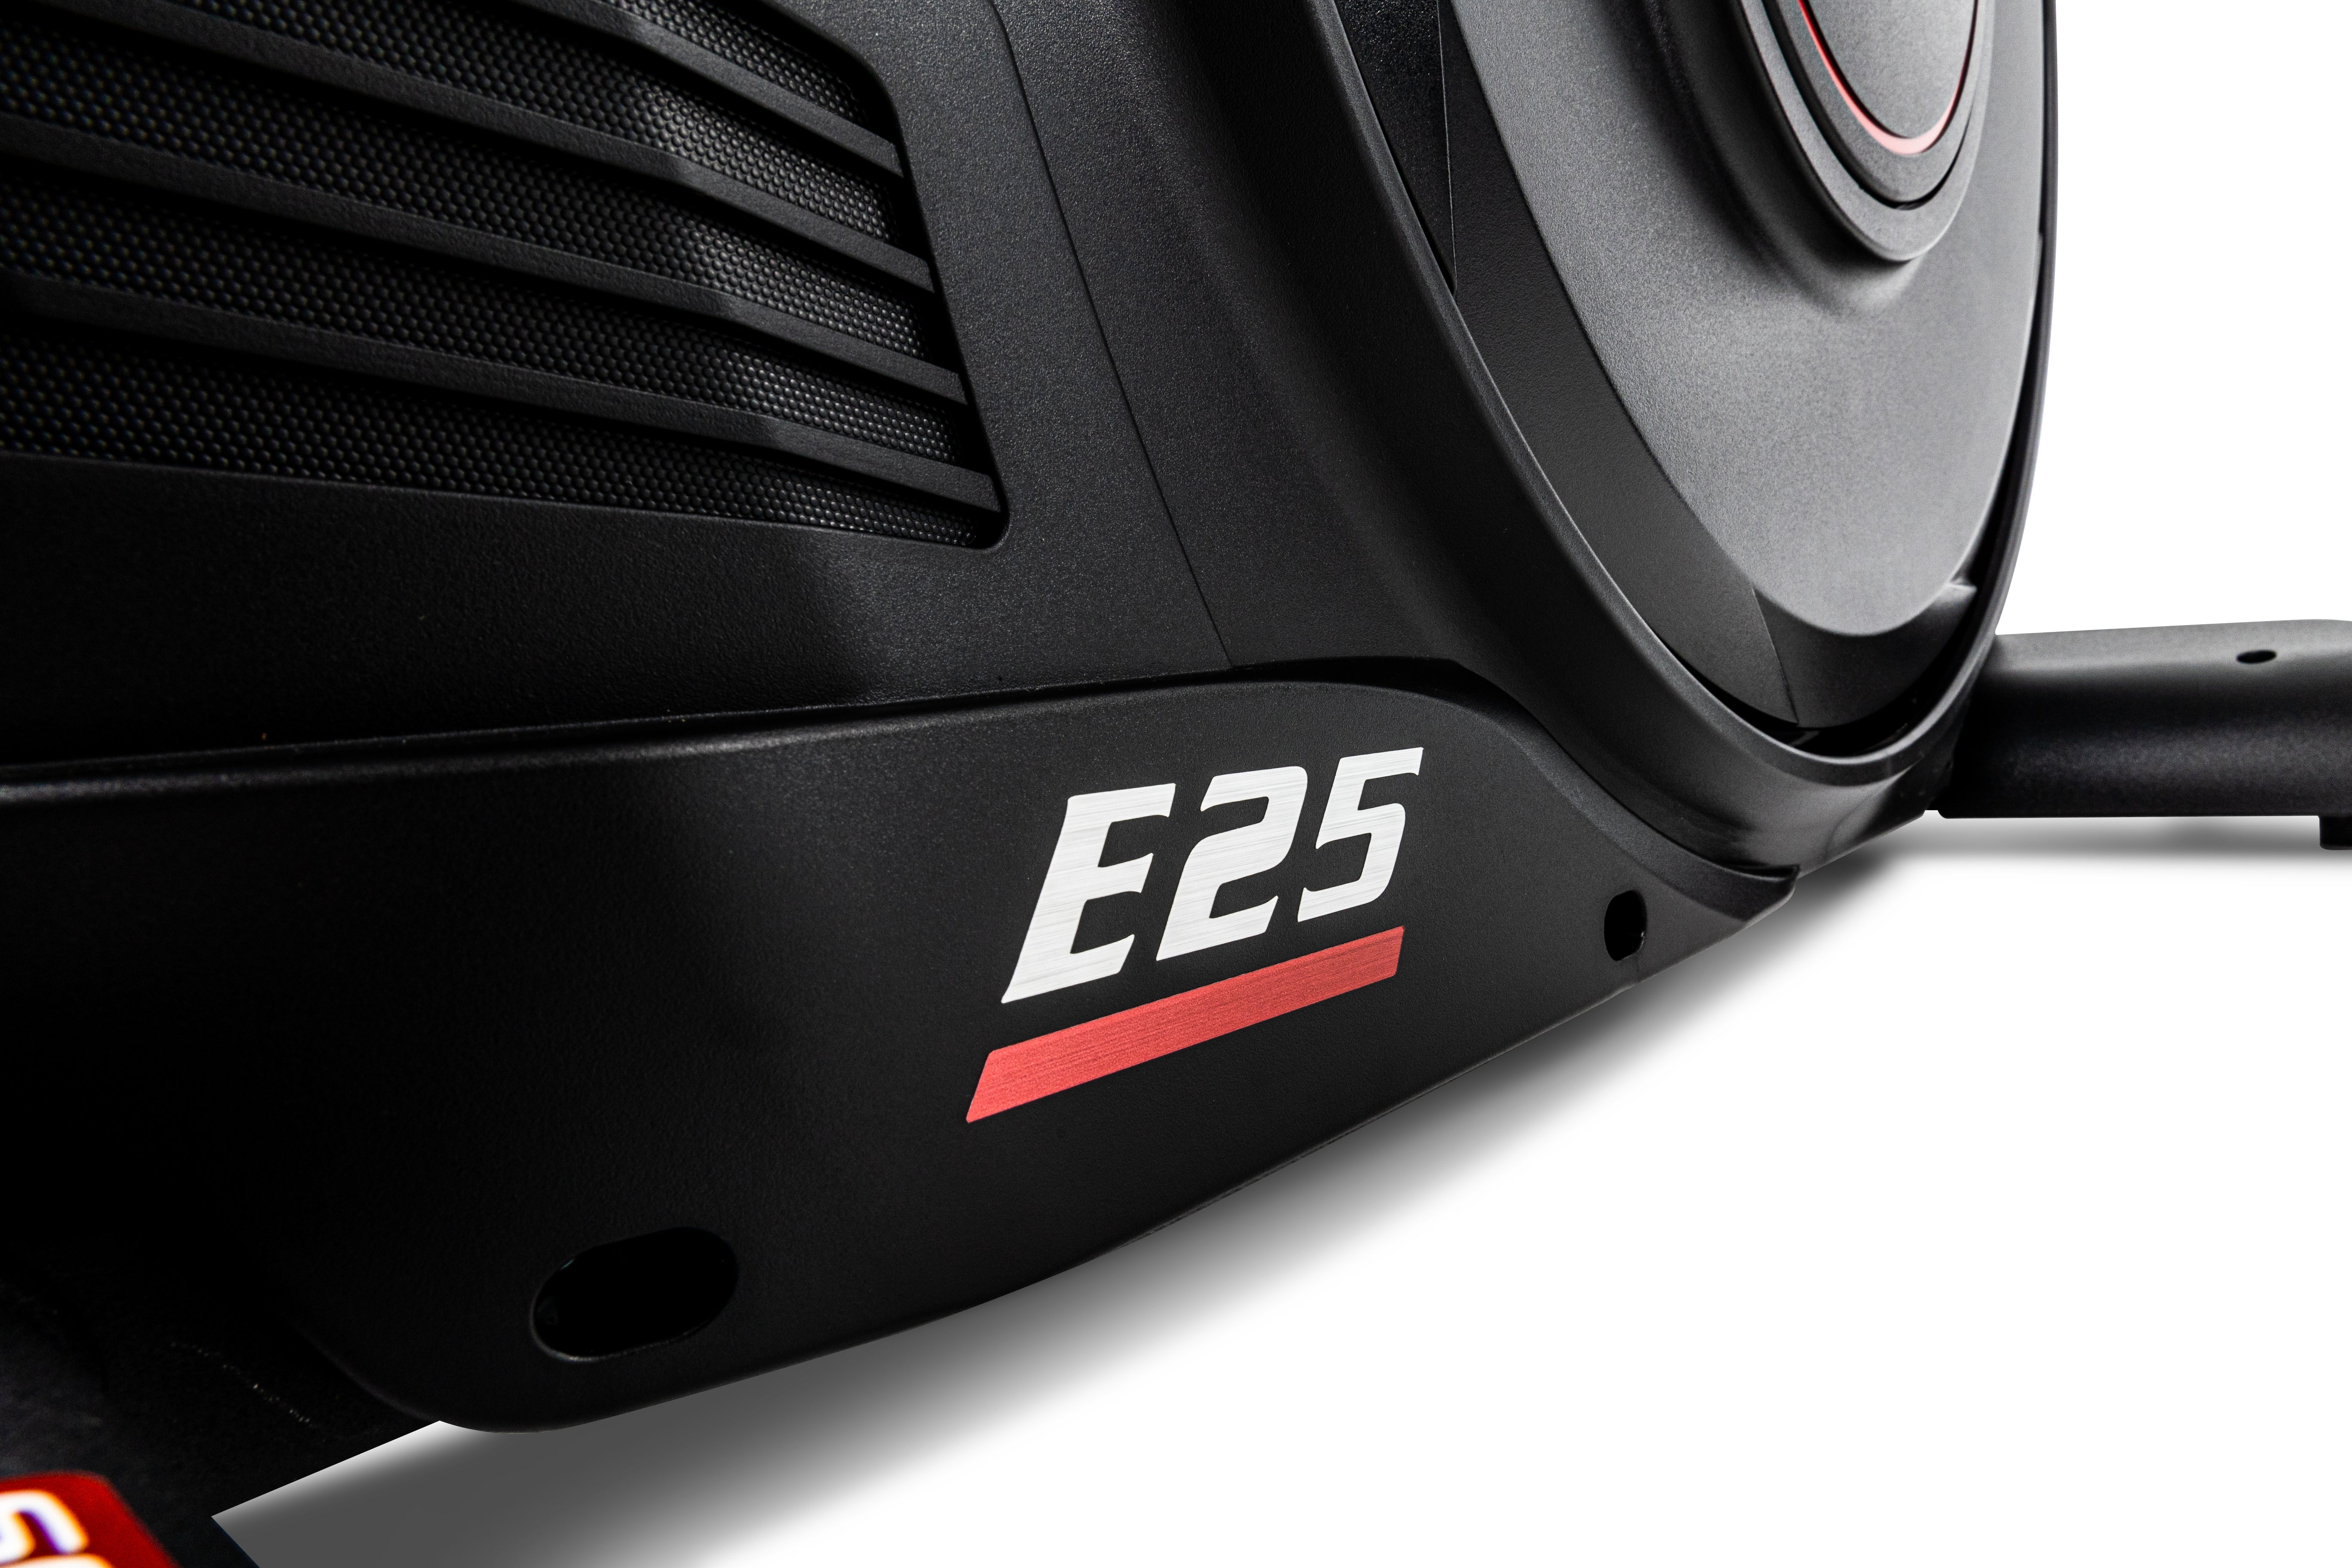 Close-up view of the Sole E25 elliptical's side panel showcasing its black and gray design, vented details, and prominently displayed 'E25' branding in white and red.